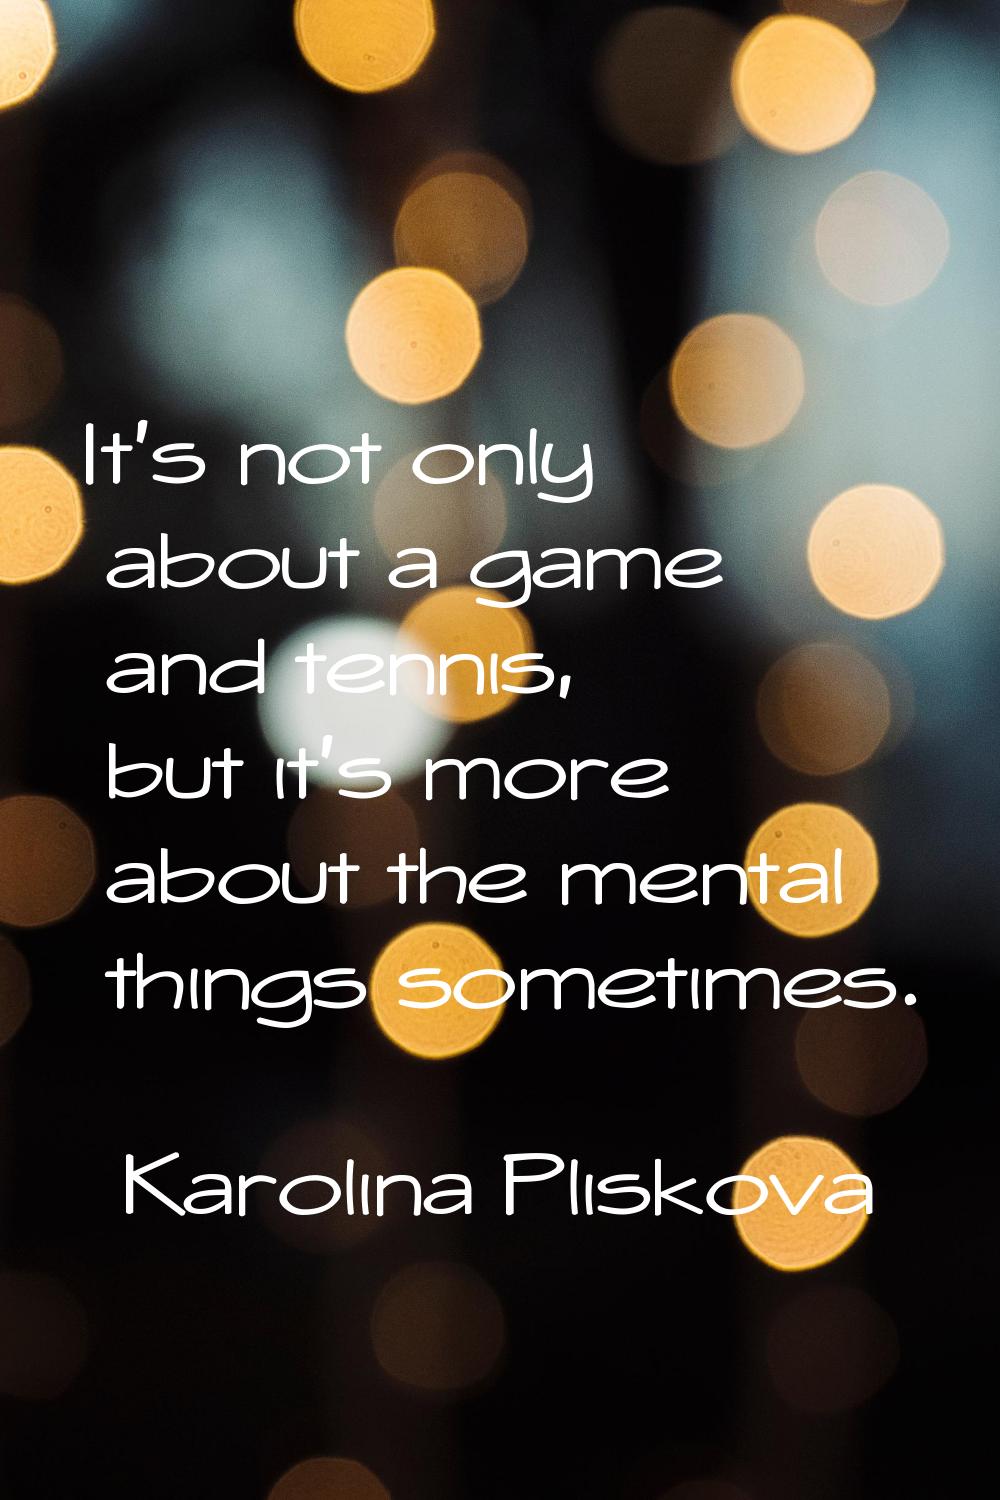 It's not only about a game and tennis, but it's more about the mental things sometimes.